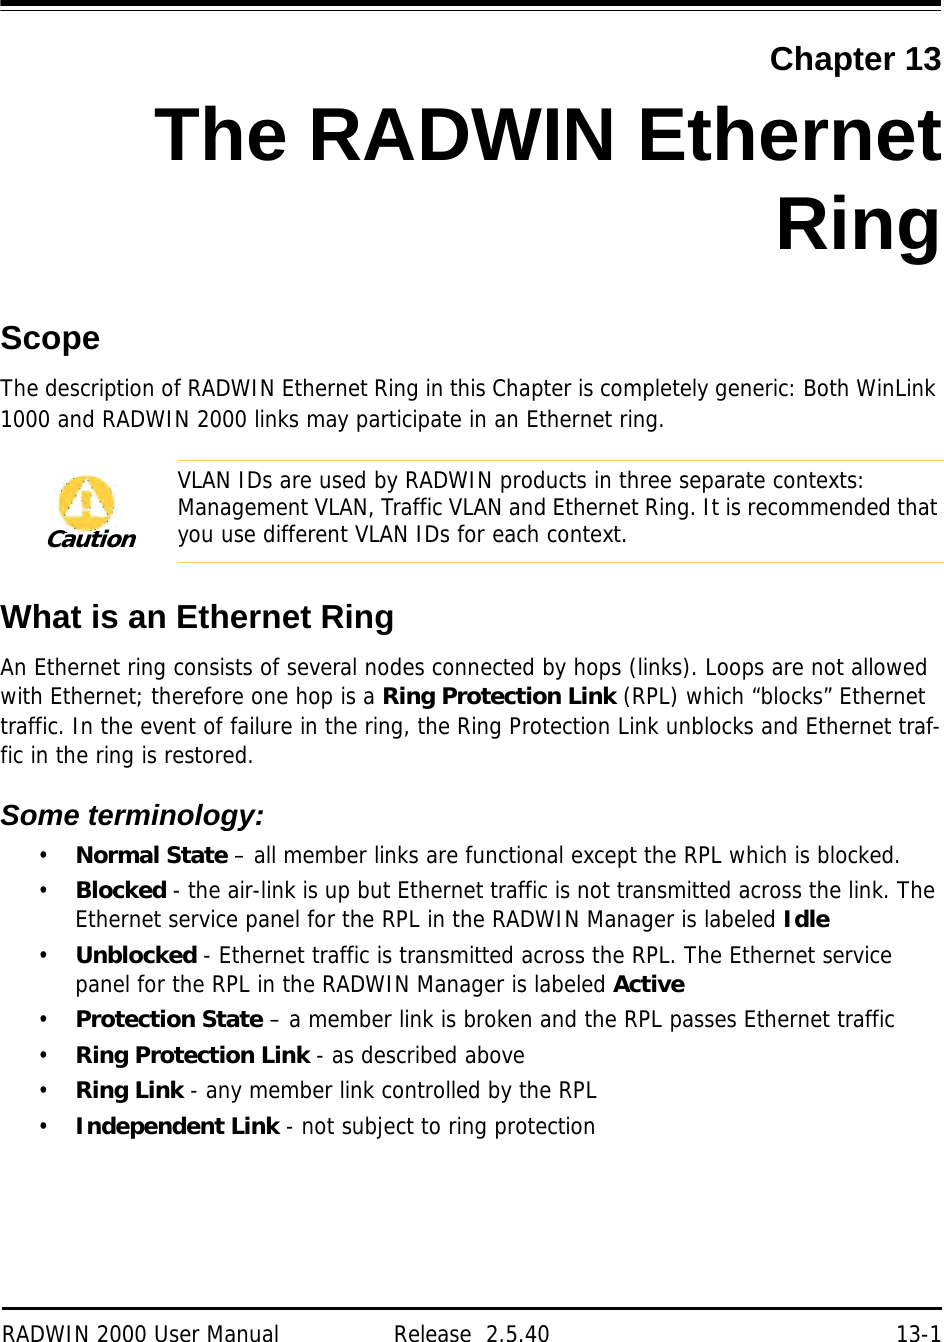 RADWIN 2000 User Manual Release  2.5.40 13-1Chapter 13The RADWIN EthernetRingScopeThe description of RADWIN Ethernet Ring in this Chapter is completely generic: Both WinLink 1000 and RADWIN 2000 links may participate in an Ethernet ring.What is an Ethernet RingAn Ethernet ring consists of several nodes connected by hops (links). Loops are not allowed with Ethernet; therefore one hop is a Ring Protection Link (RPL) which “blocks” Ethernet traffic. In the event of failure in the ring, the Ring Protection Link unblocks and Ethernet traf-fic in the ring is restored.Some terminology:•Normal State – all member links are functional except the RPL which is blocked.•Blocked - the air-link is up but Ethernet traffic is not transmitted across the link. The Ethernet service panel for the RPL in the RADWIN Manager is labeled Idle•Unblocked - Ethernet traffic is transmitted across the RPL. The Ethernet service panel for the RPL in the RADWIN Manager is labeled Active•Protection State – a member link is broken and the RPL passes Ethernet traffic•Ring Protection Link - as described above•Ring Link - any member link controlled by the RPL•Independent Link - not subject to ring protectionCautionVLAN IDs are used by RADWIN products in three separate contexts: Management VLAN, Traffic VLAN and Ethernet Ring. It is recommended that you use different VLAN IDs for each context.